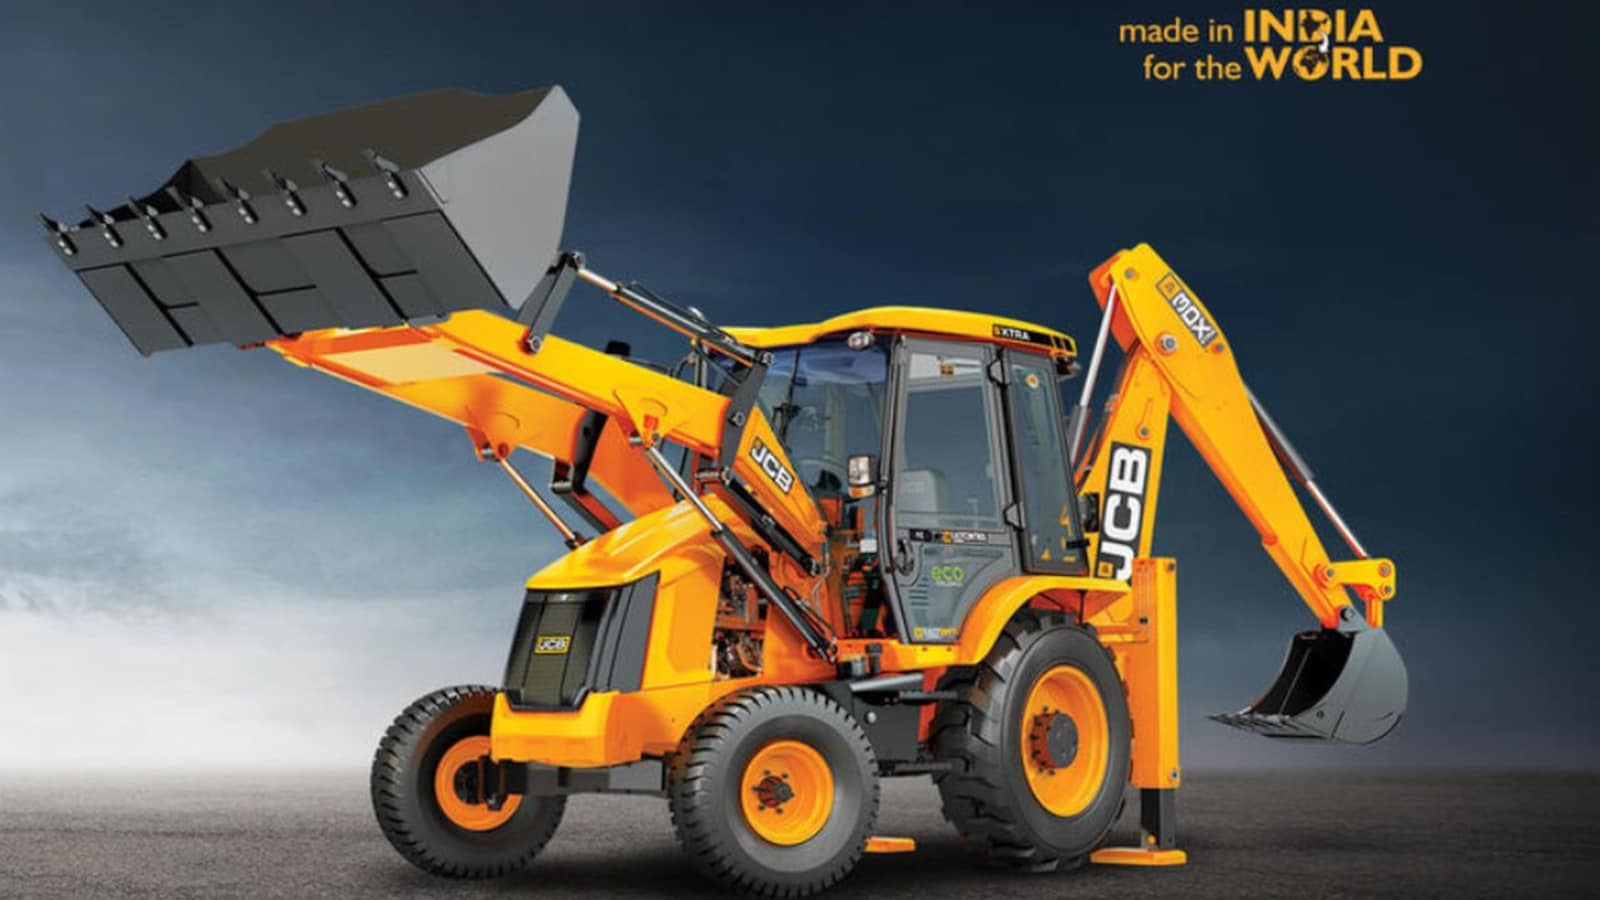 JCB to invest Rs 650 cr for a new manufacturing facility in Gujarat